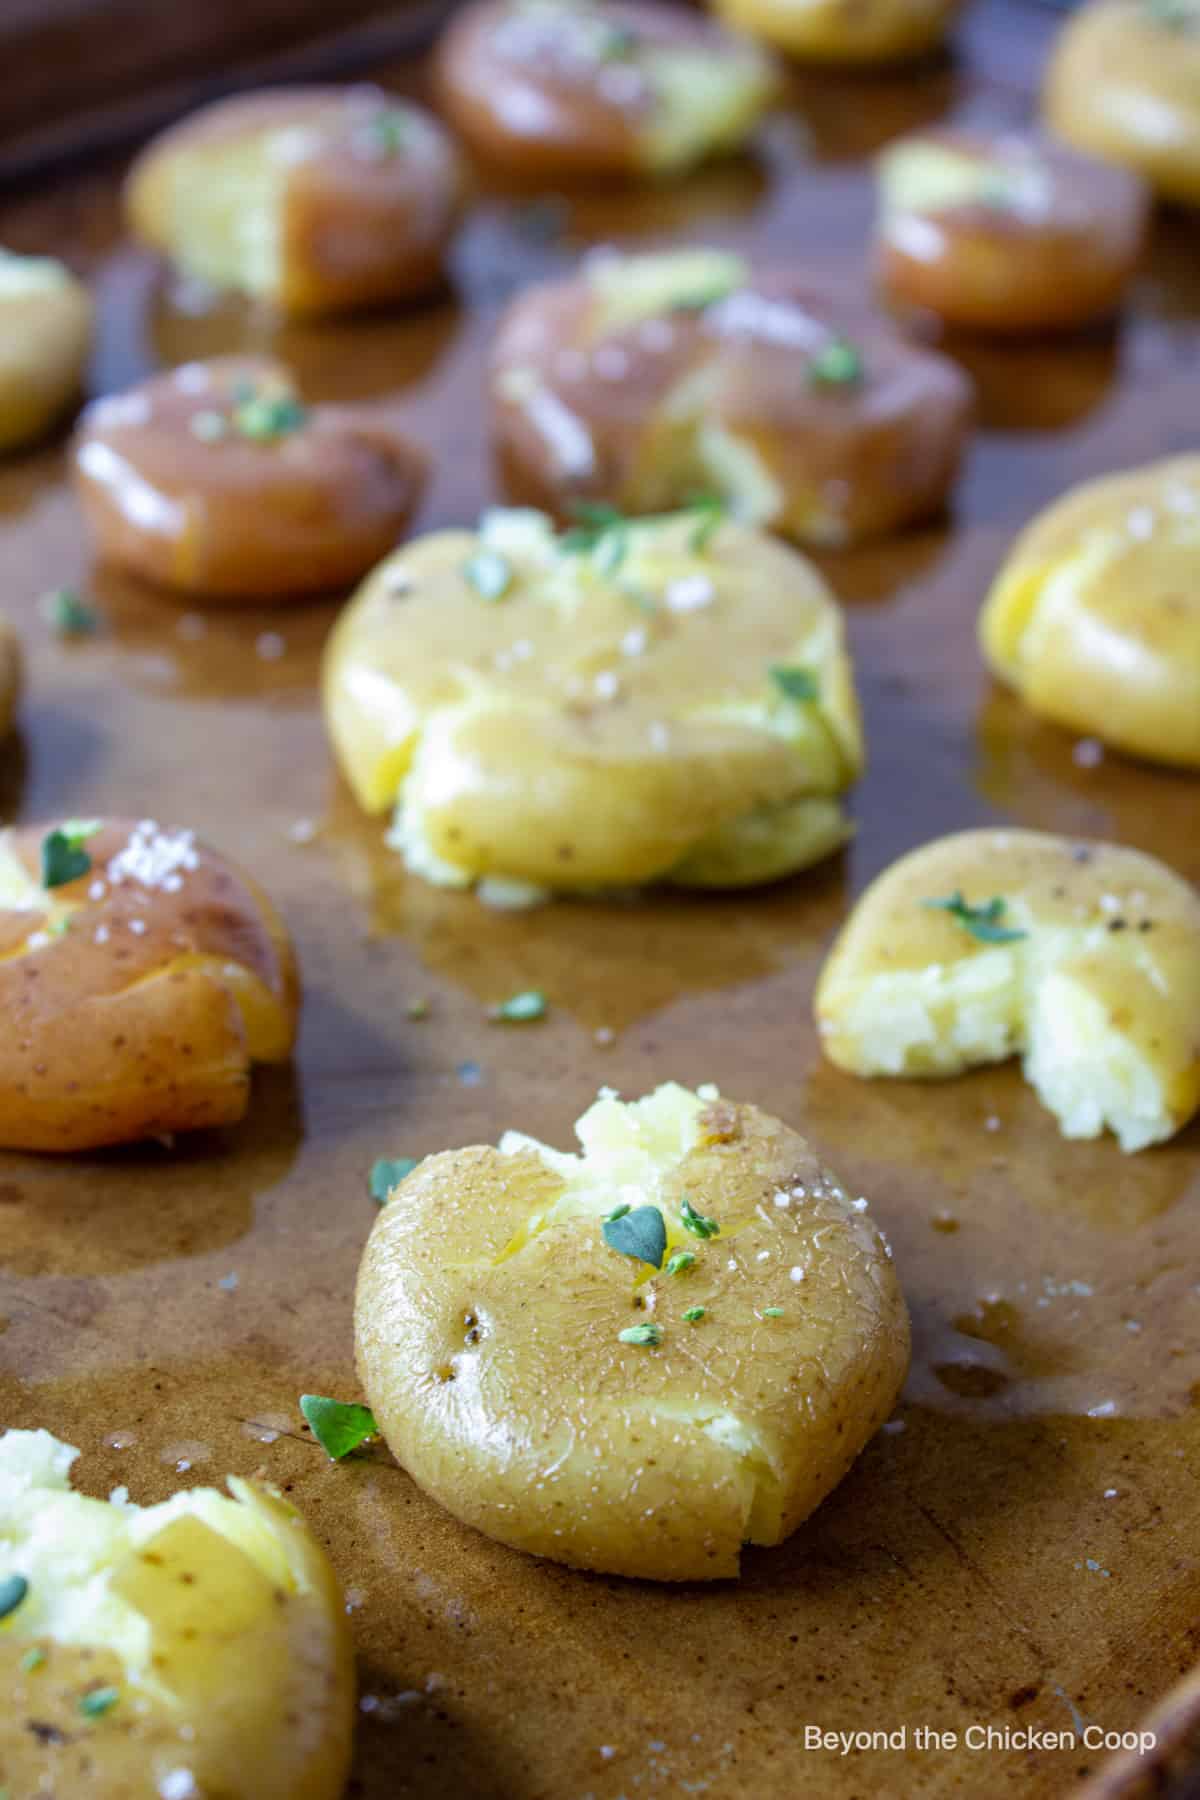 Smashed potatoes with herbs and salt.